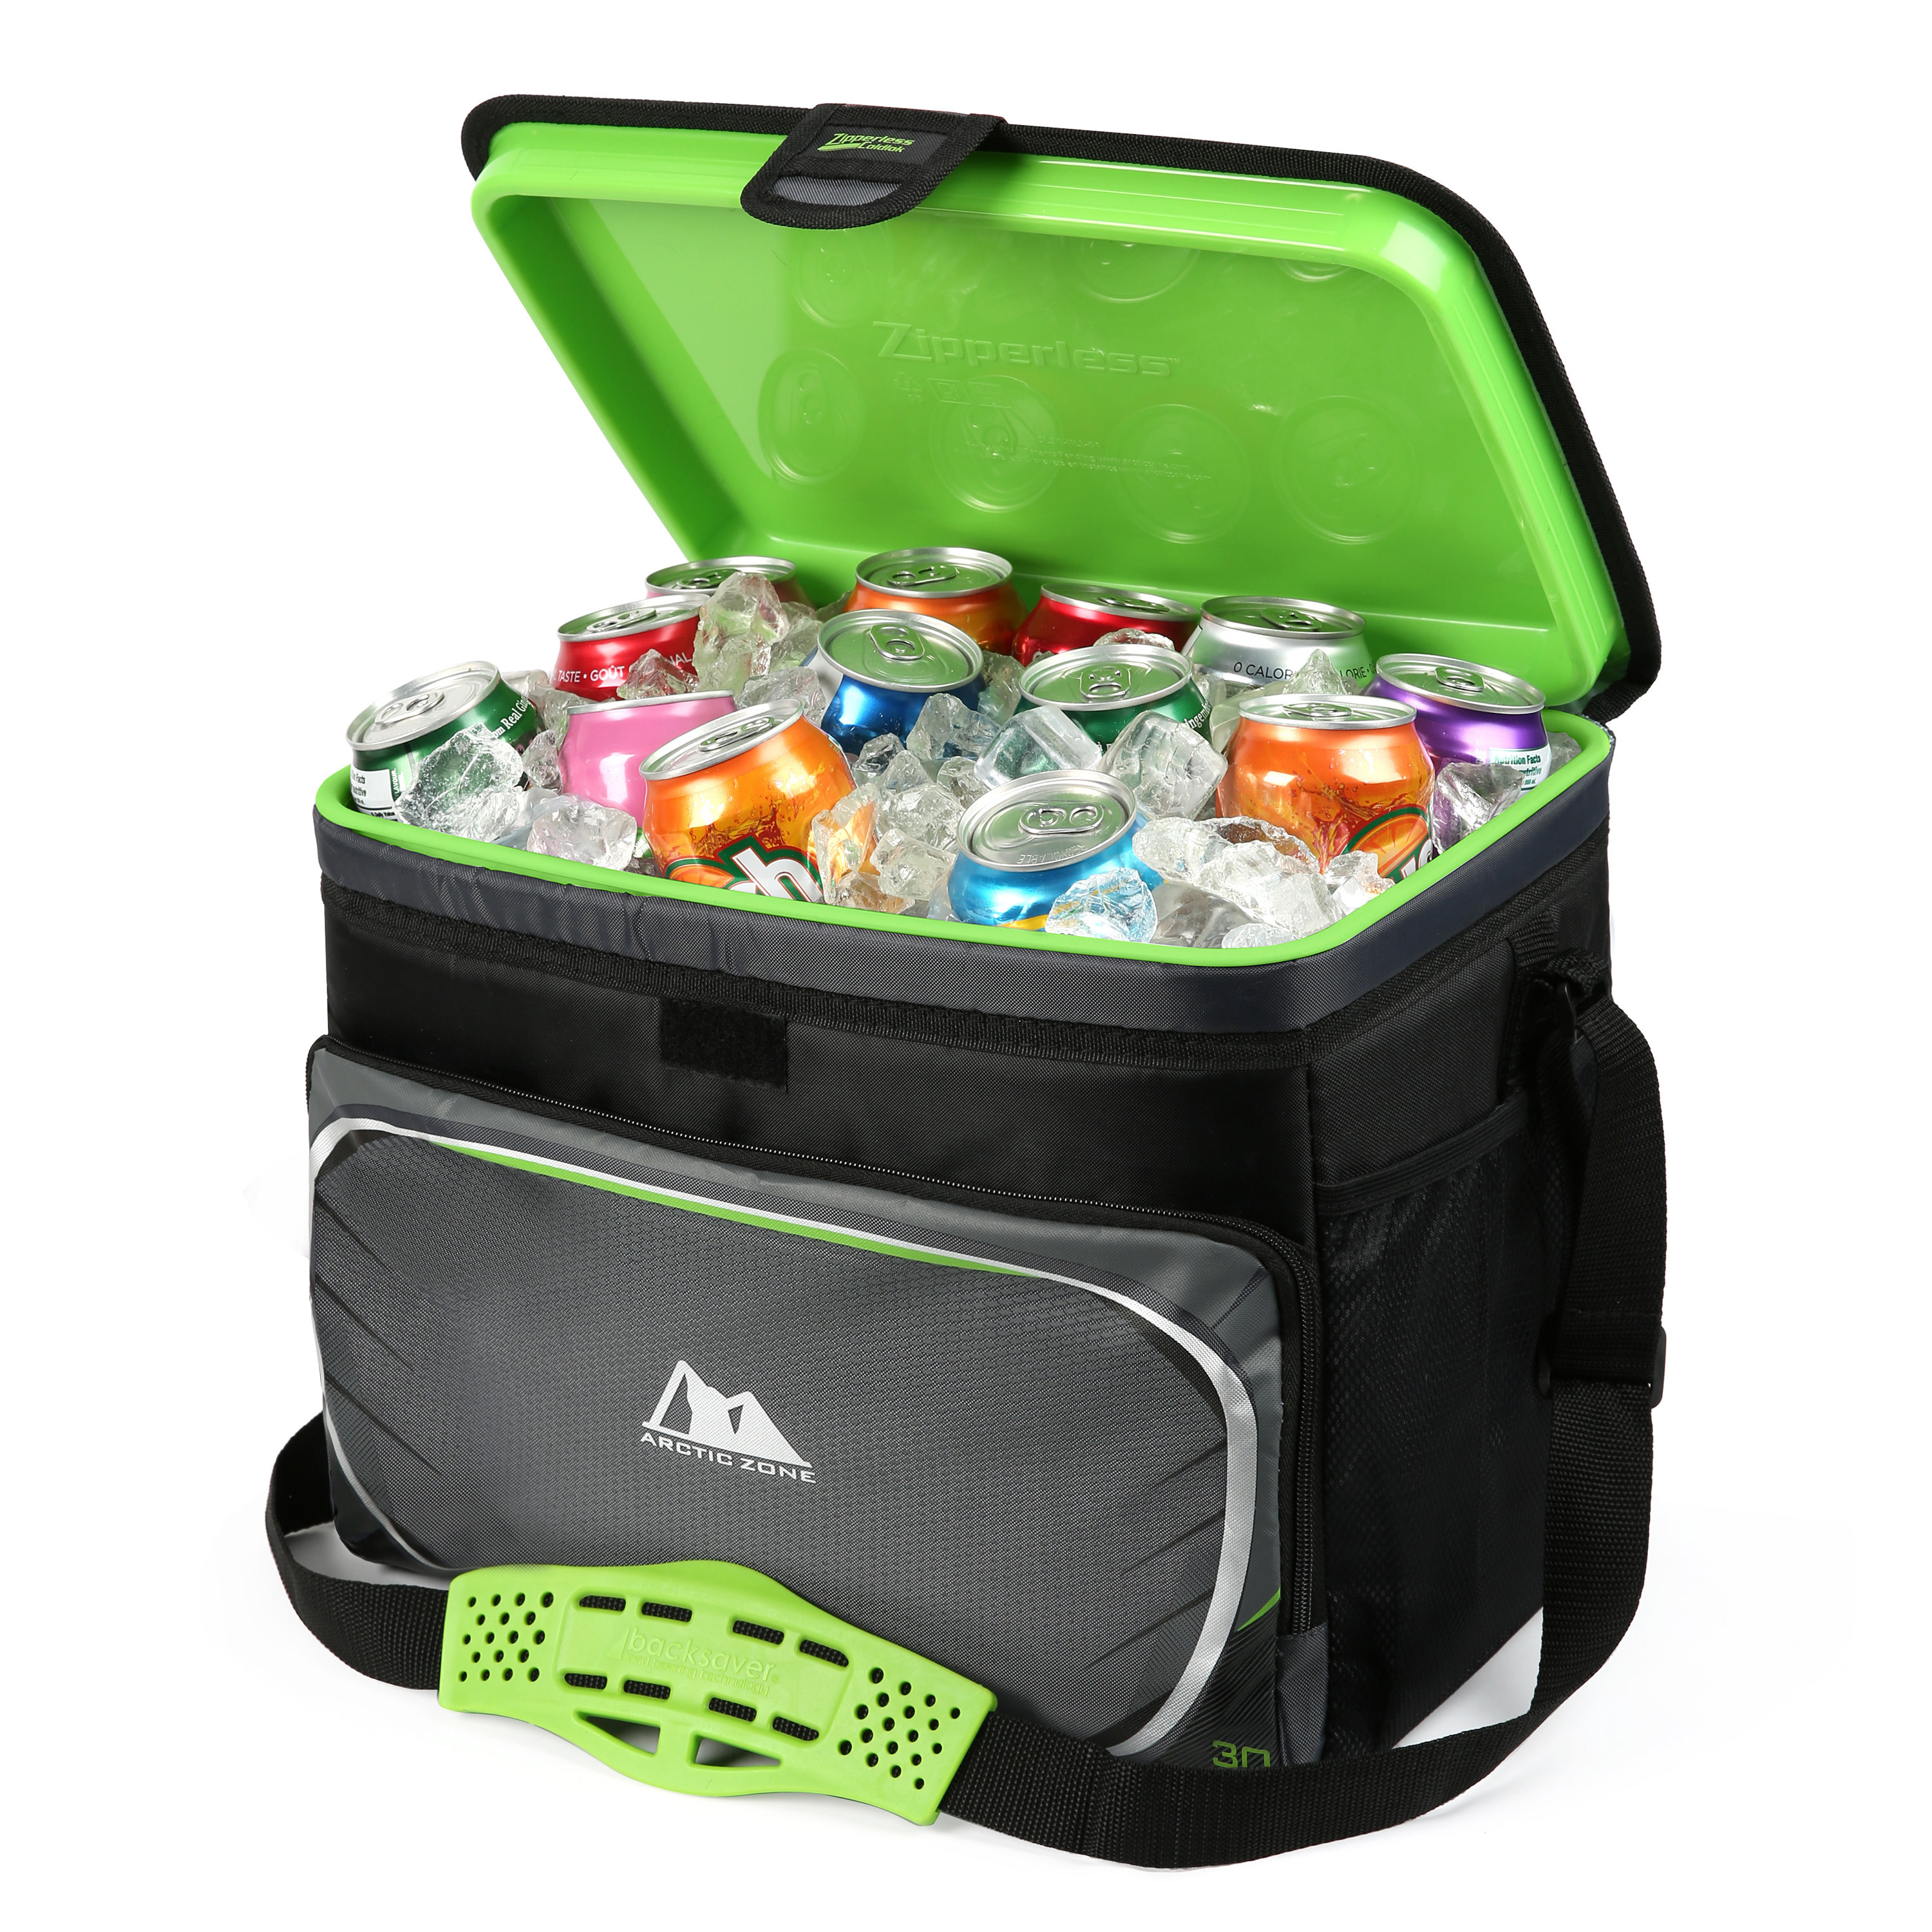 Arctic Zone 30 cans Zipperless Soft Sided Cooler with Hard Liner, Black and Green - image 3 of 11